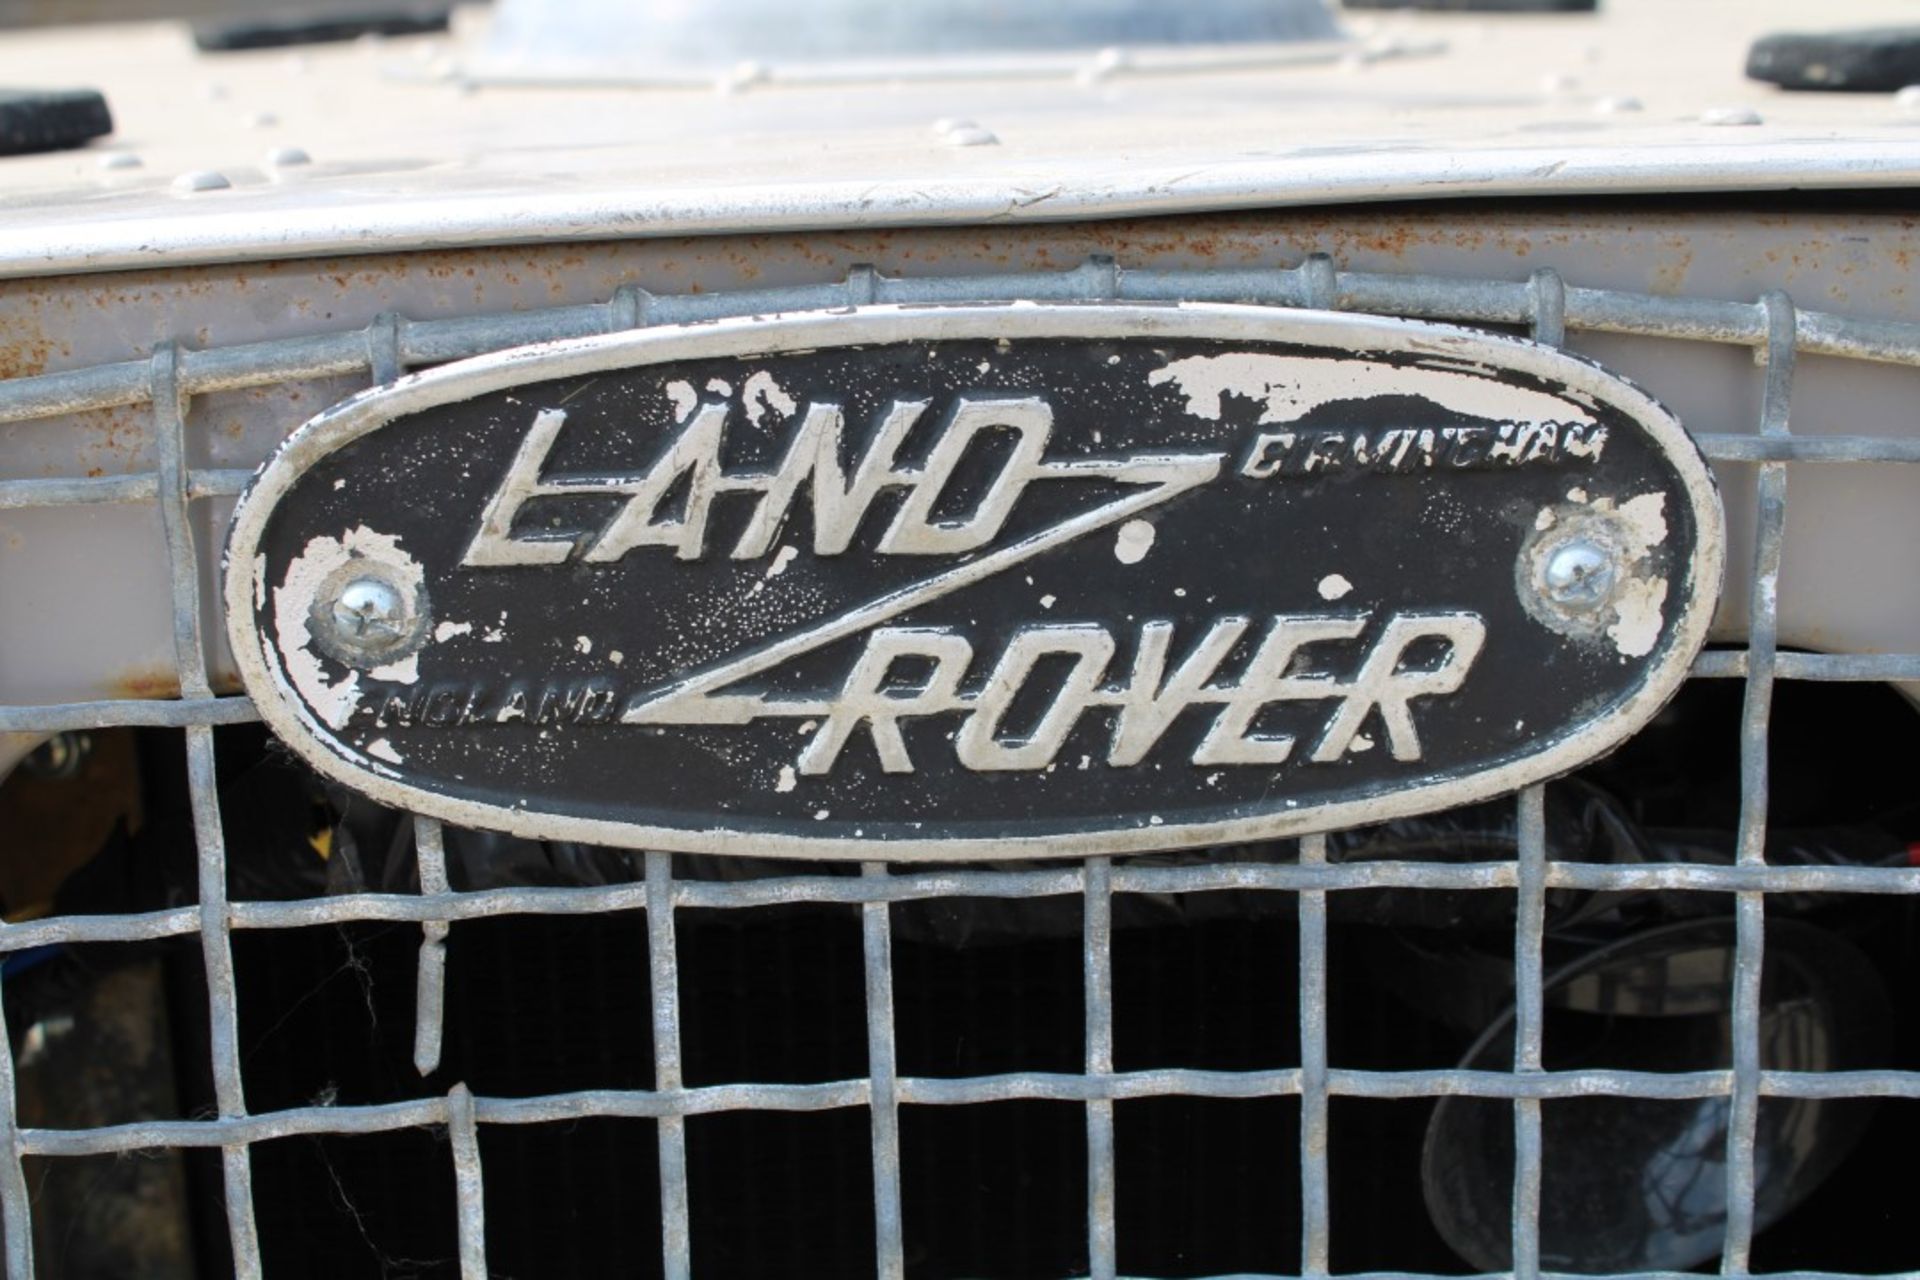 1958 Land Rover 109 Tray back Series I" - Image 21 of 21